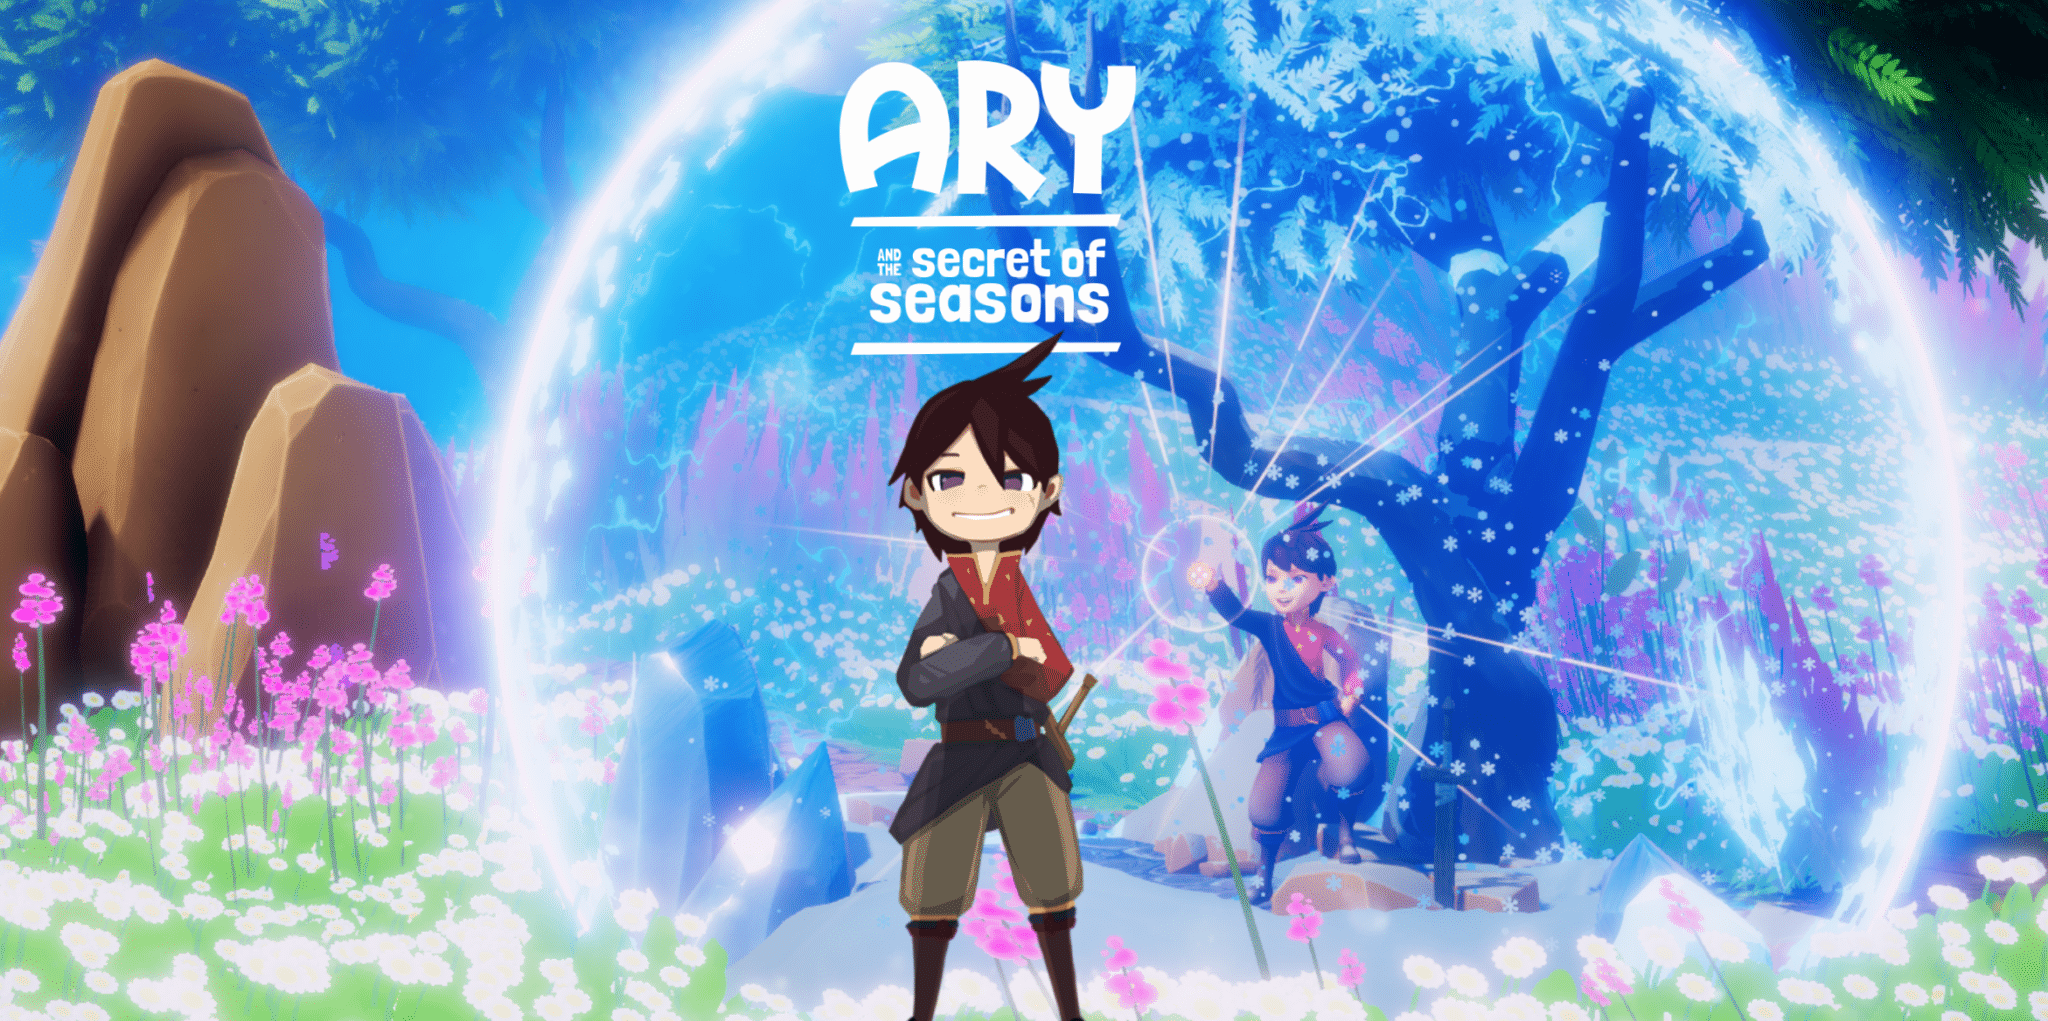 ary and the secret of seasons guide